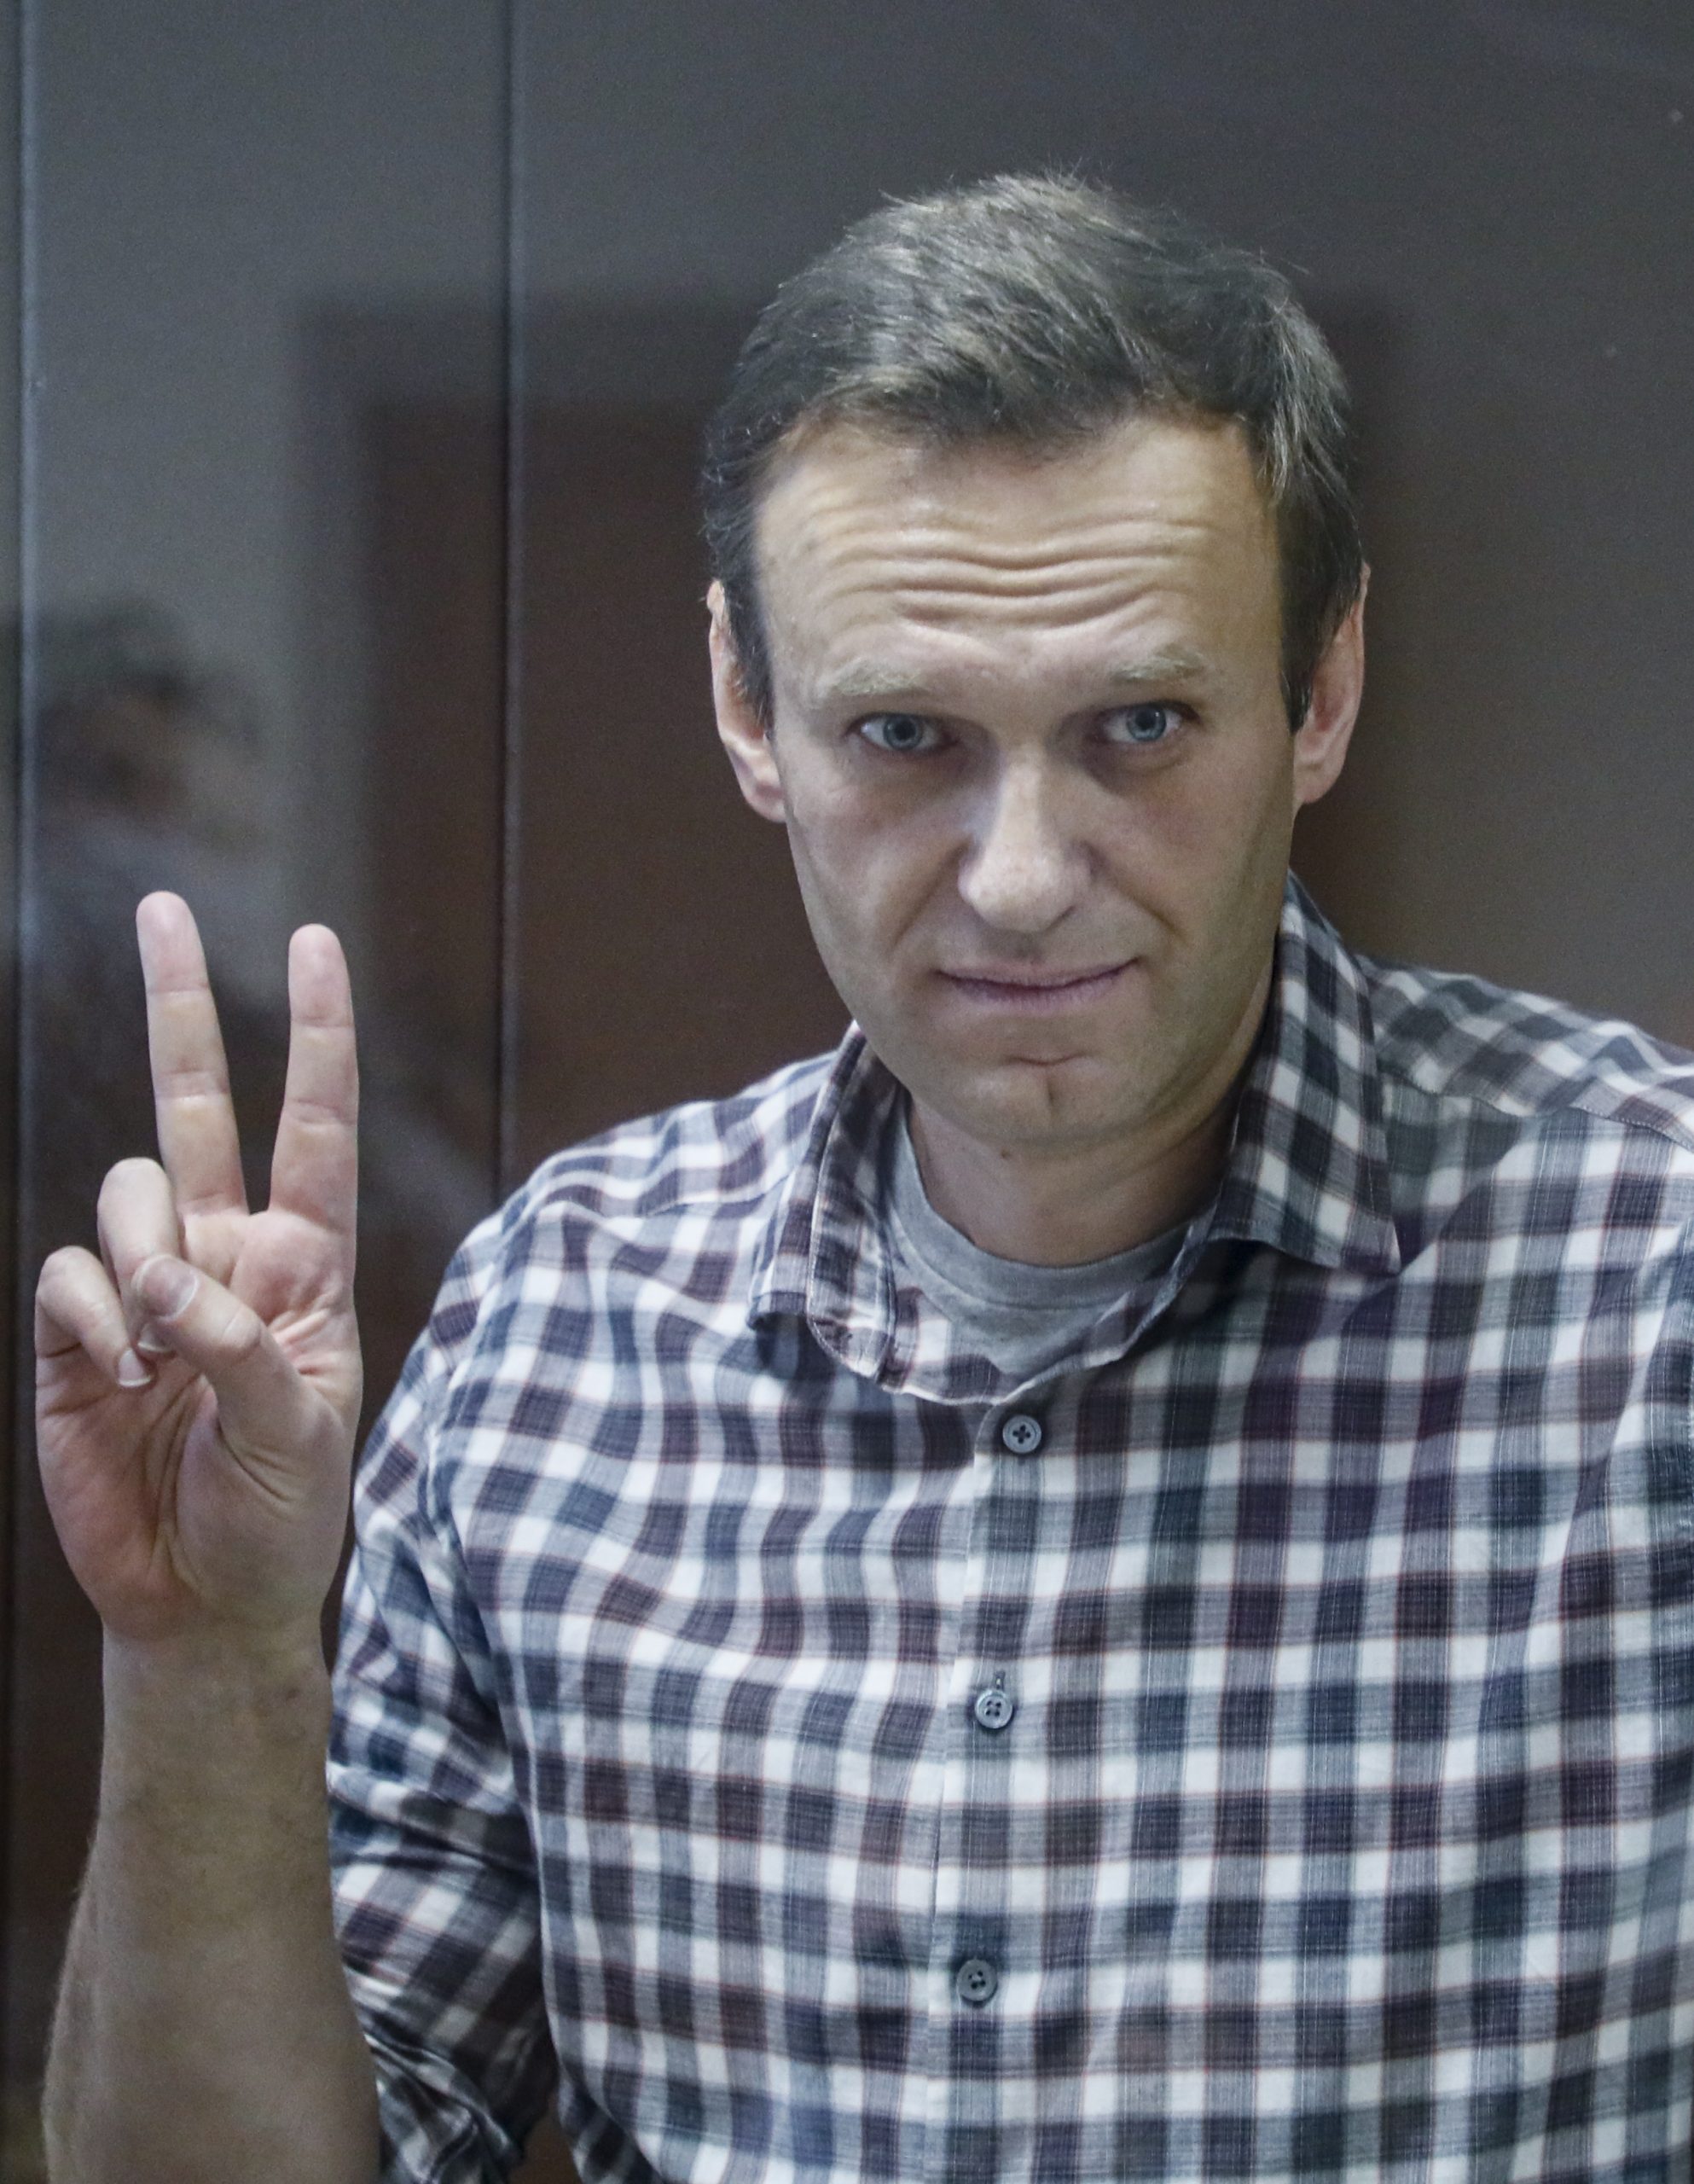 epa09108967 (FILE) Russian opposition leader Alexei Navalny gestures inside a glass cage prior to a hearing at the Babushkinsky District Court in Moscow, Russia, 20 February 2021 (reissued 31 March 2021). Russian opposition leader Alexei Navalny, who serves his 2,5 years sentence in a prison colony in the town of Pokrov in the Vladimir region, announced he is going on hunger strike in a protest of mistreatment in the prison.  EPA/YURI KOCHETKOV *** Local Caption *** 56711412